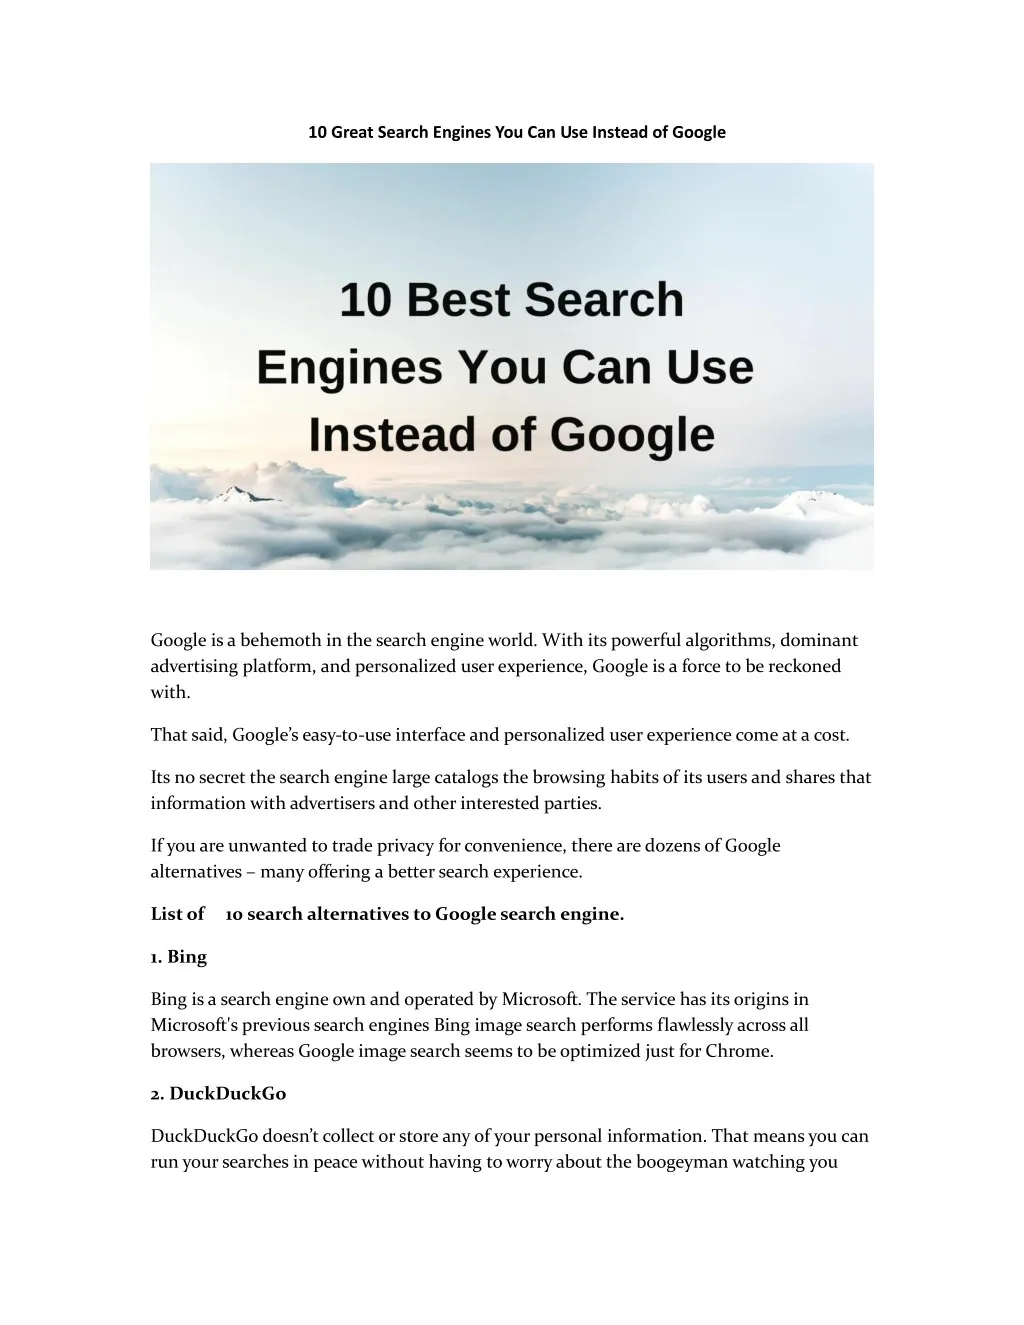 10 great search engines you can use instead